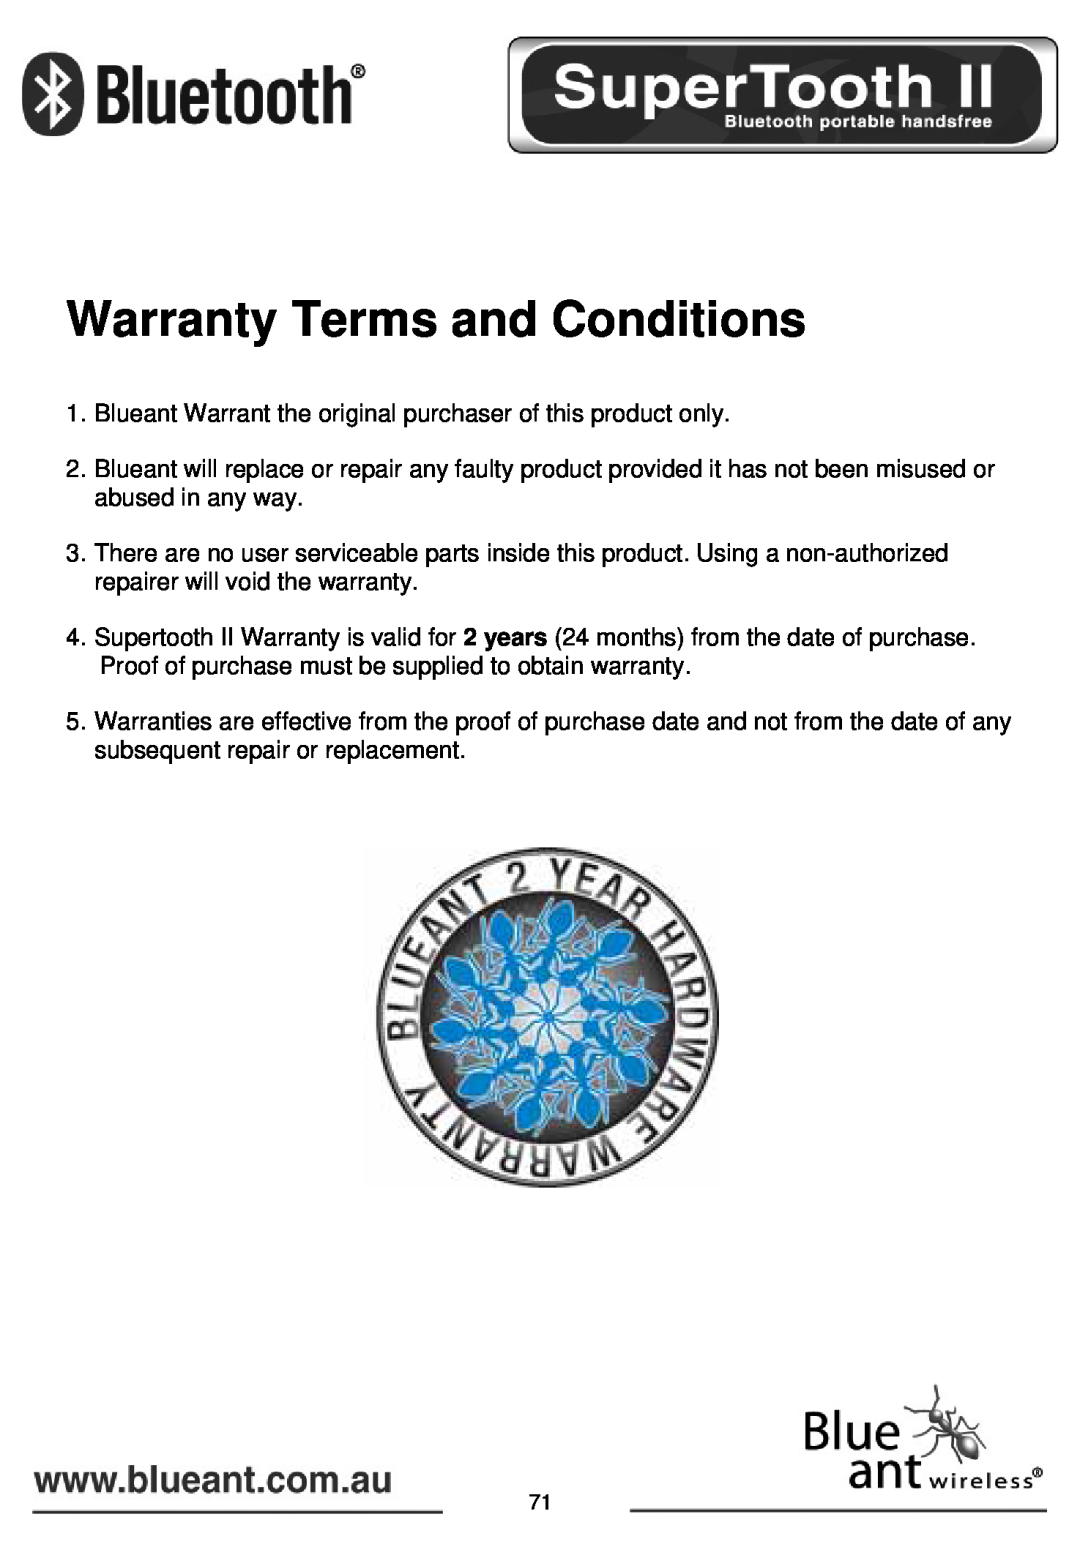 BlueAnt Wireless SUPERTOOTH II manual Warranty Terms and Conditions 